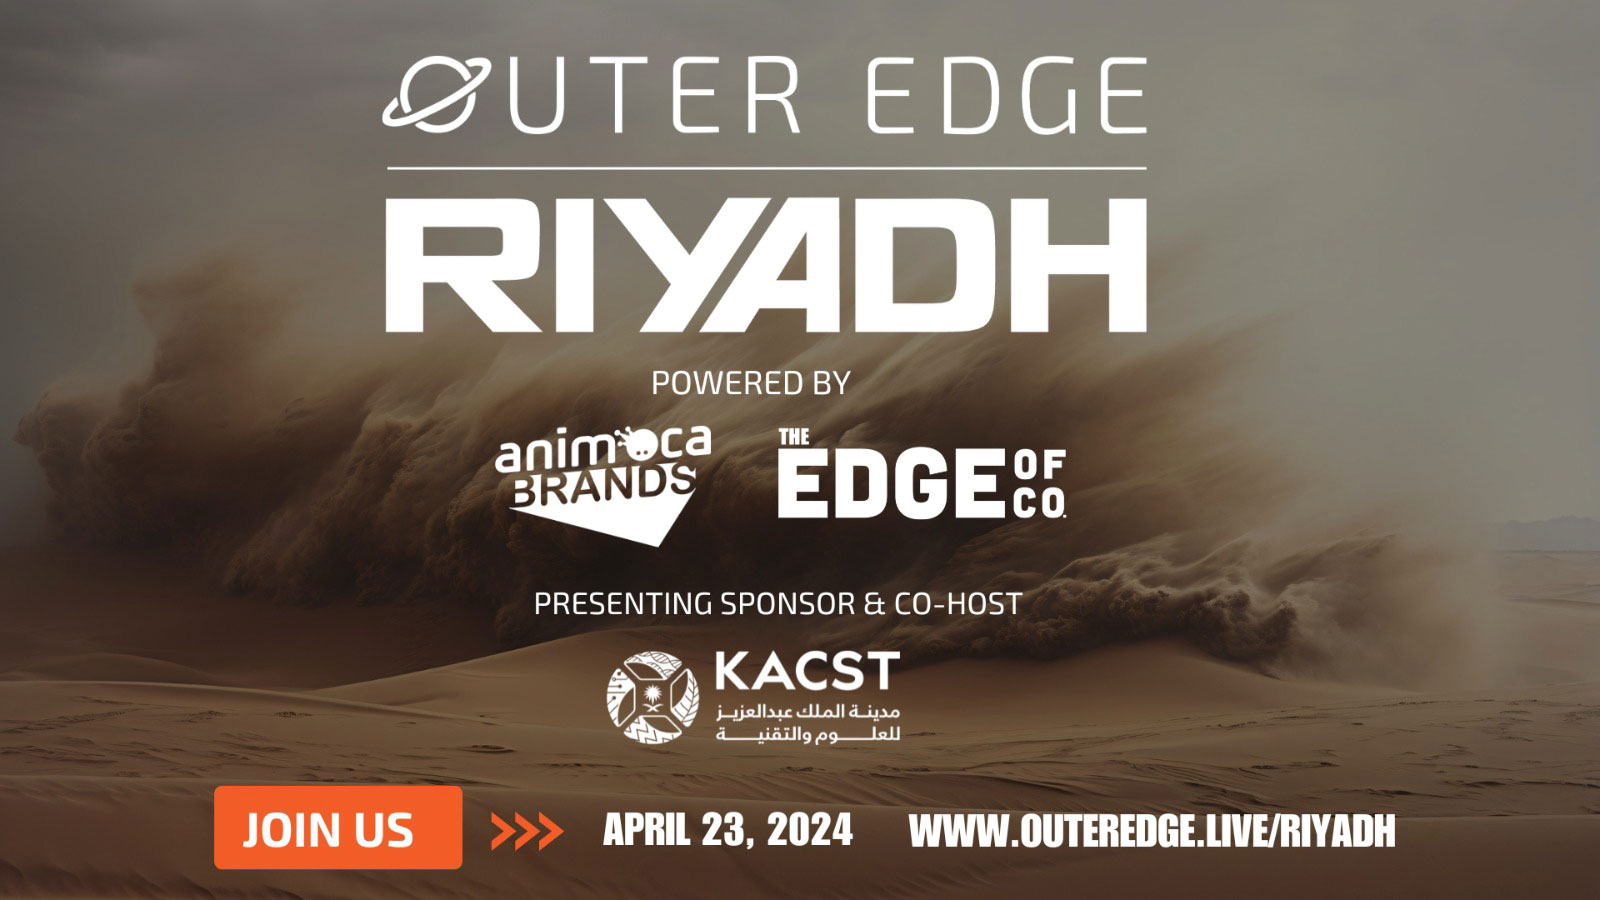 From LA to Riyadh : Outer Edge Web3 Innovation Summit debuts in Saudi Arabia in Partnership with Animoca Brands and KACST